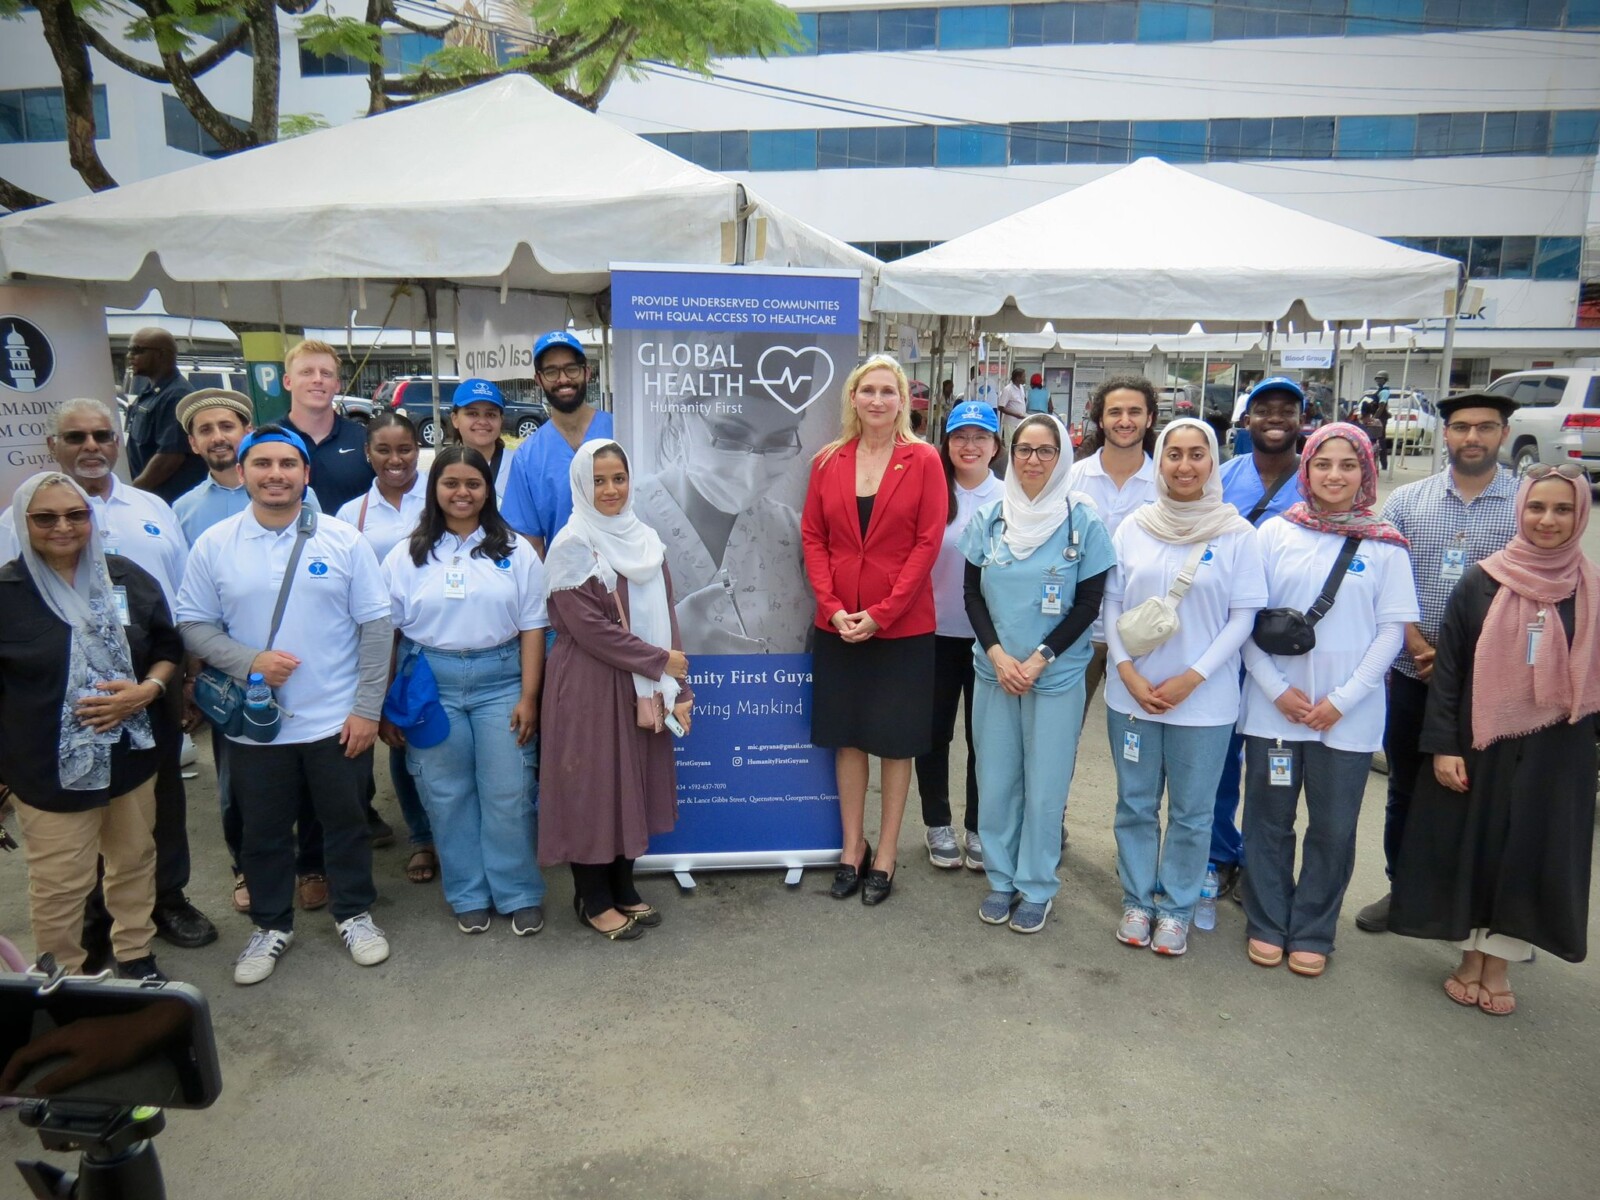 A group of people pose standing outdoors next to a sign reading Global Health. Some of the groups wears white t shirts or medical scrubs and baseball caps or hijabs. In the center is a tall blonde woman in a red blazer.